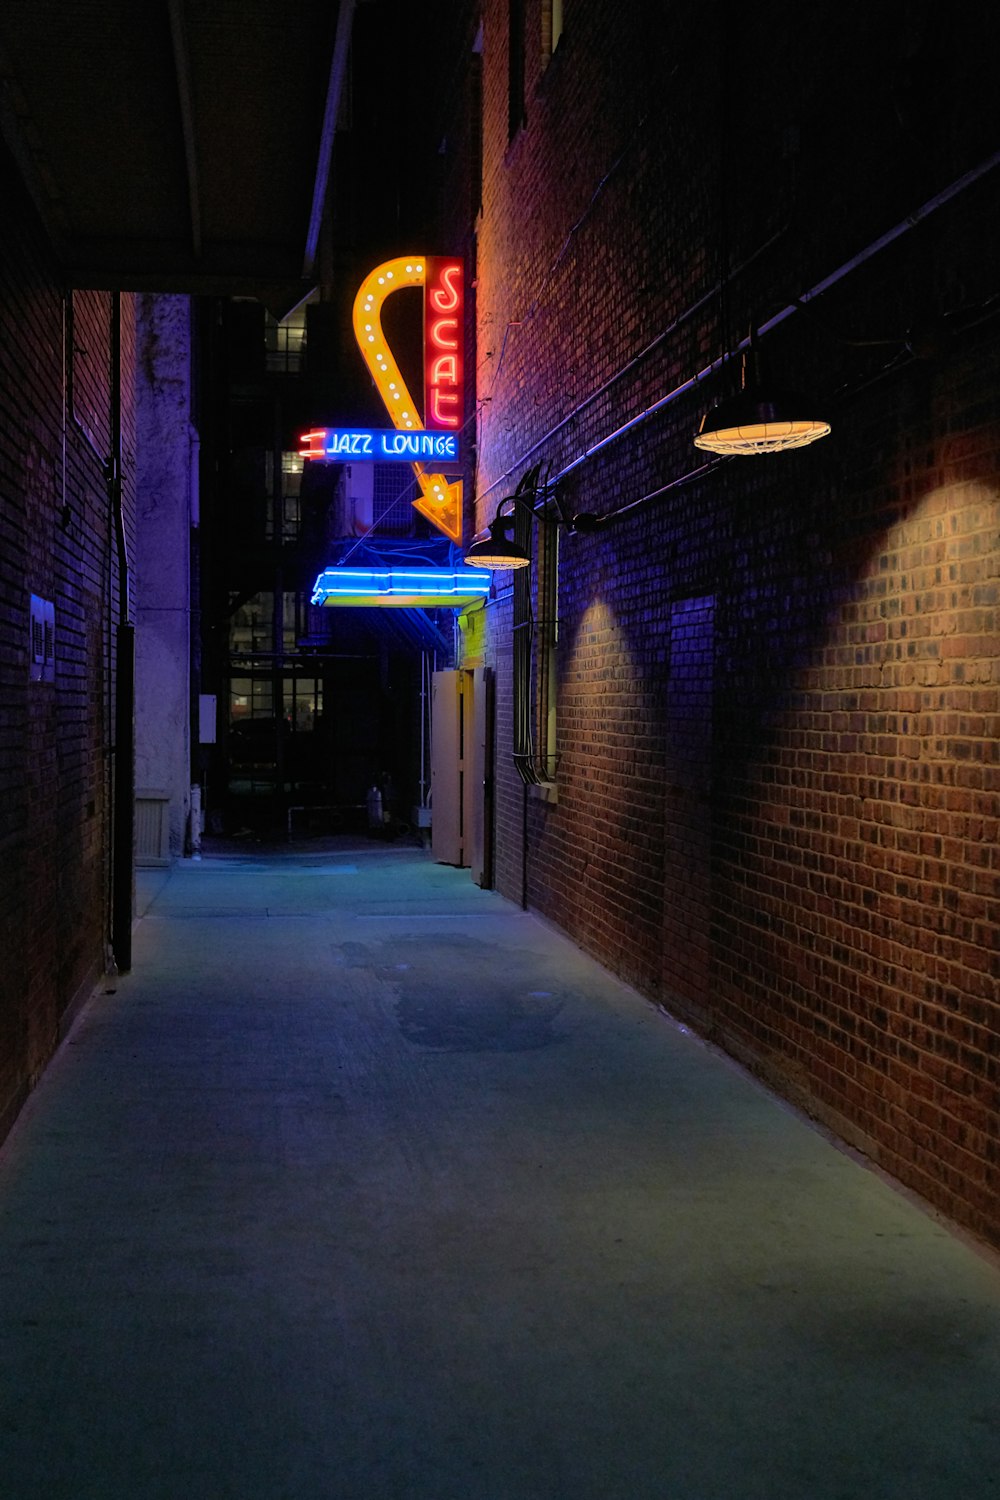 Scat LED signage beside wall in the alley